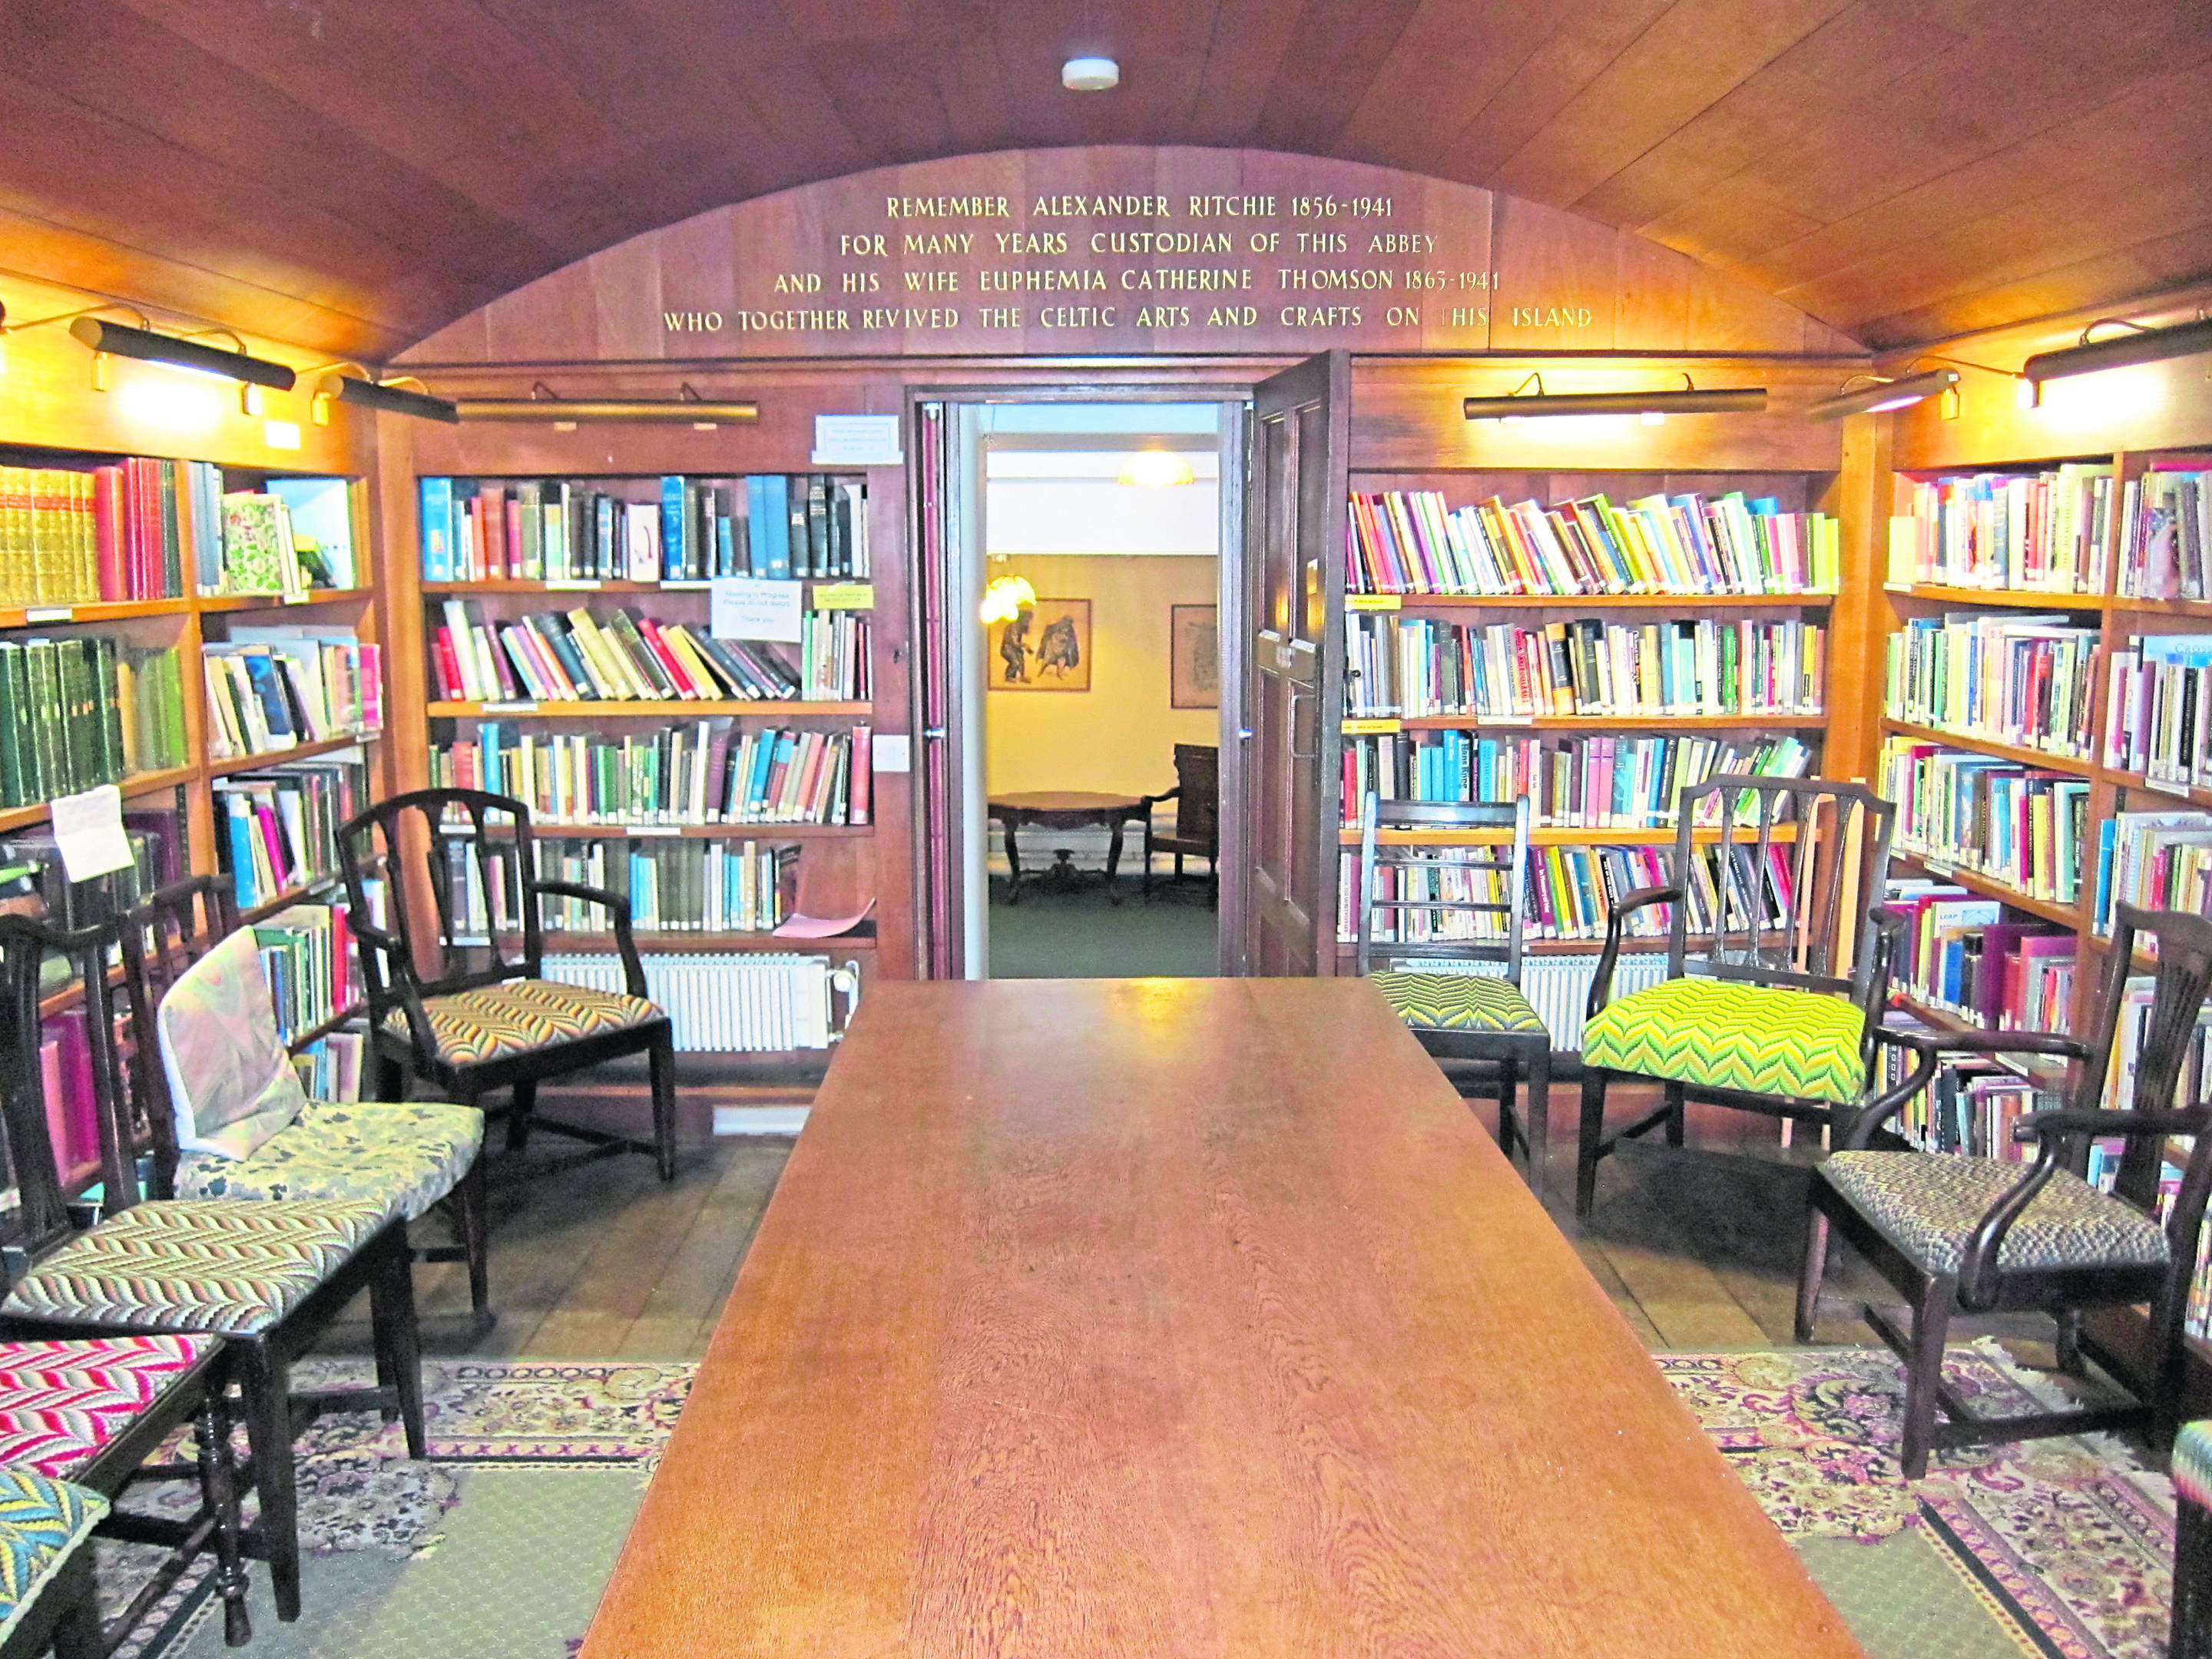 READING ROOM: In the project, 300 volumes were repaired by conservation experts on the mainland